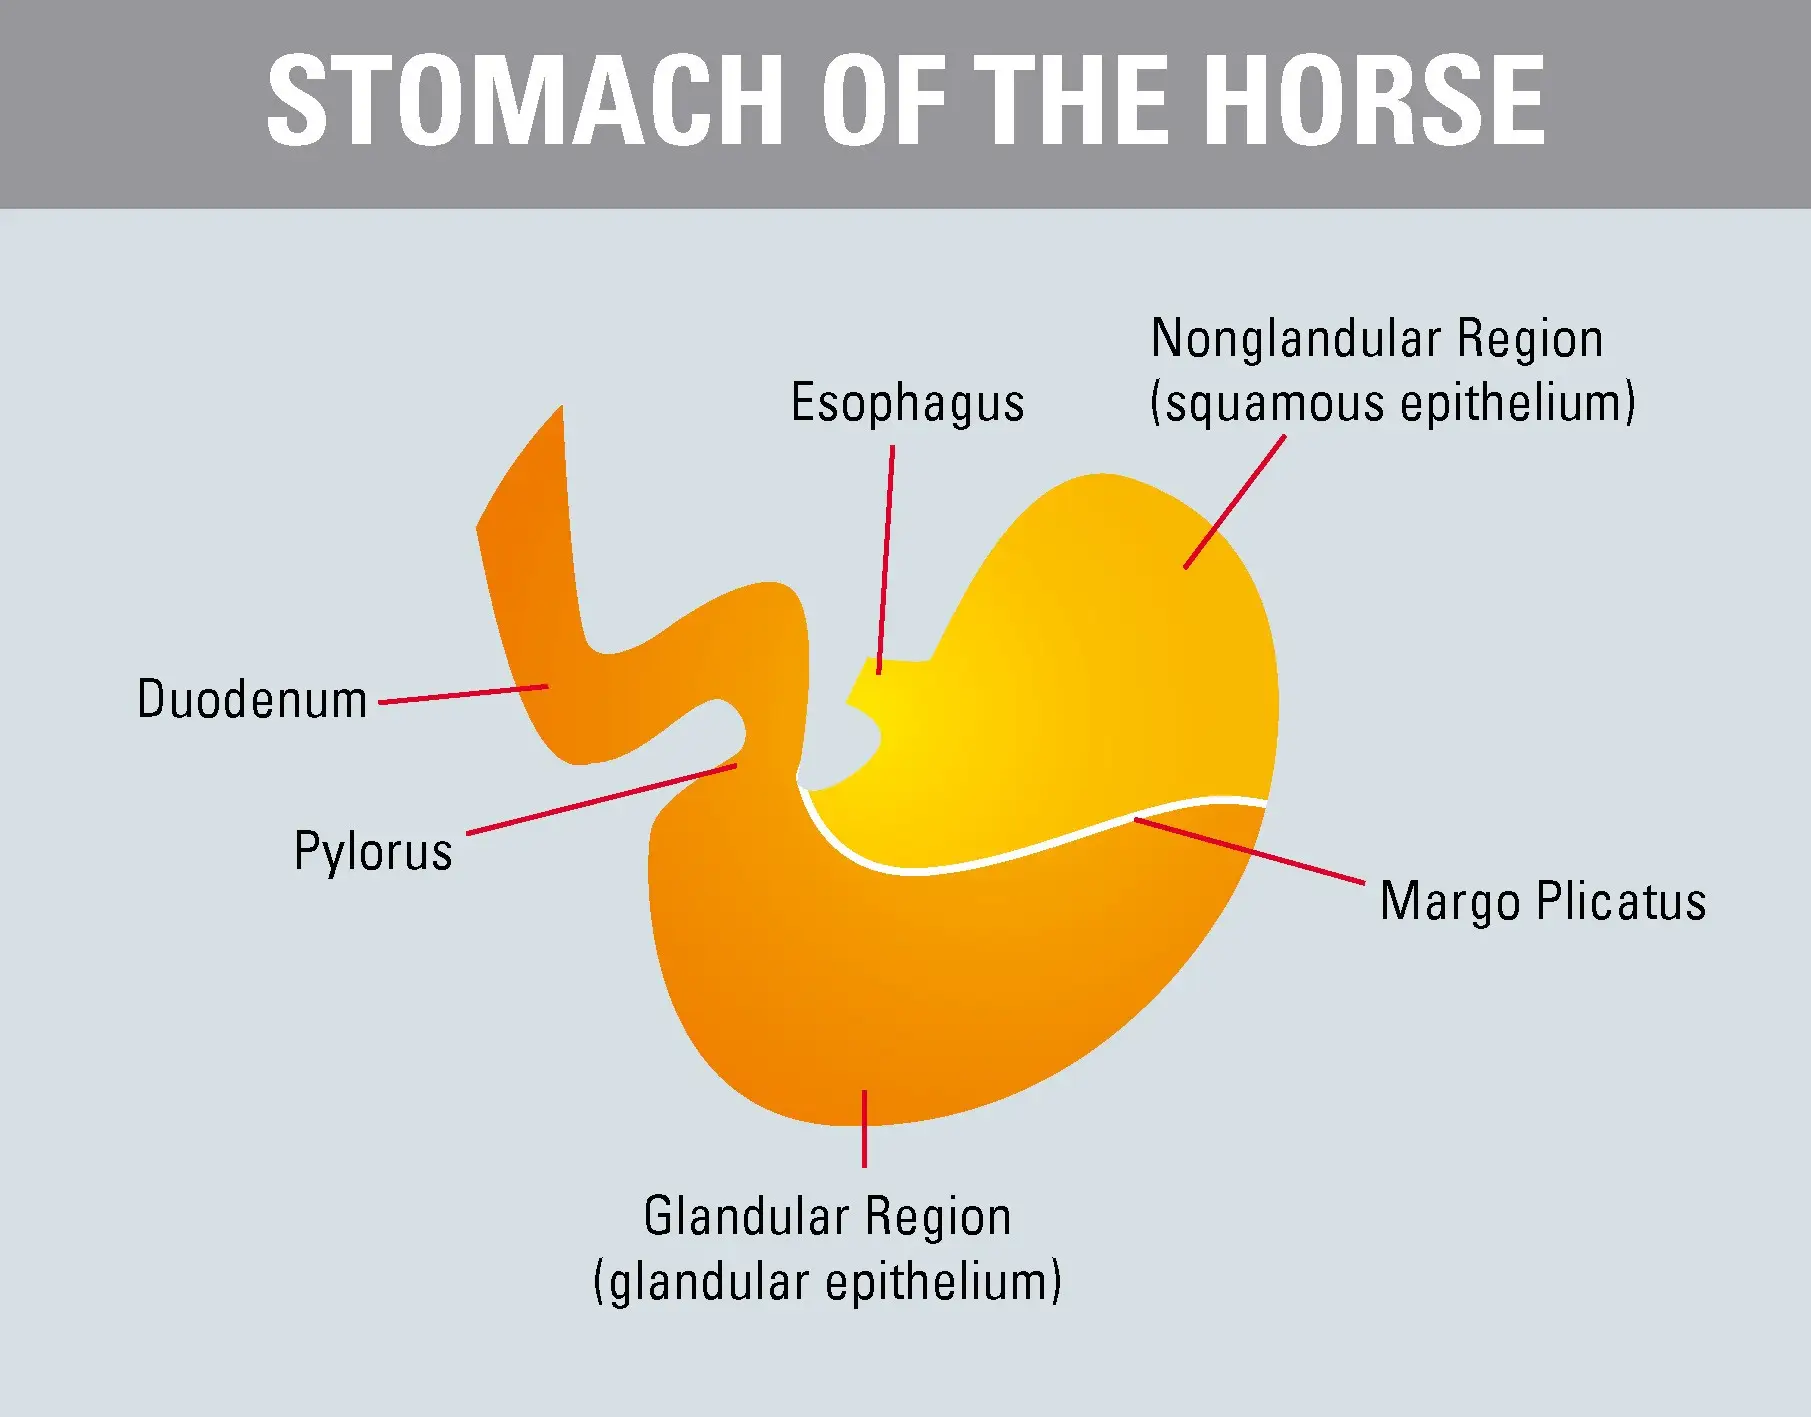 Equine Gastric Ulcer Syndrome (EGUS)